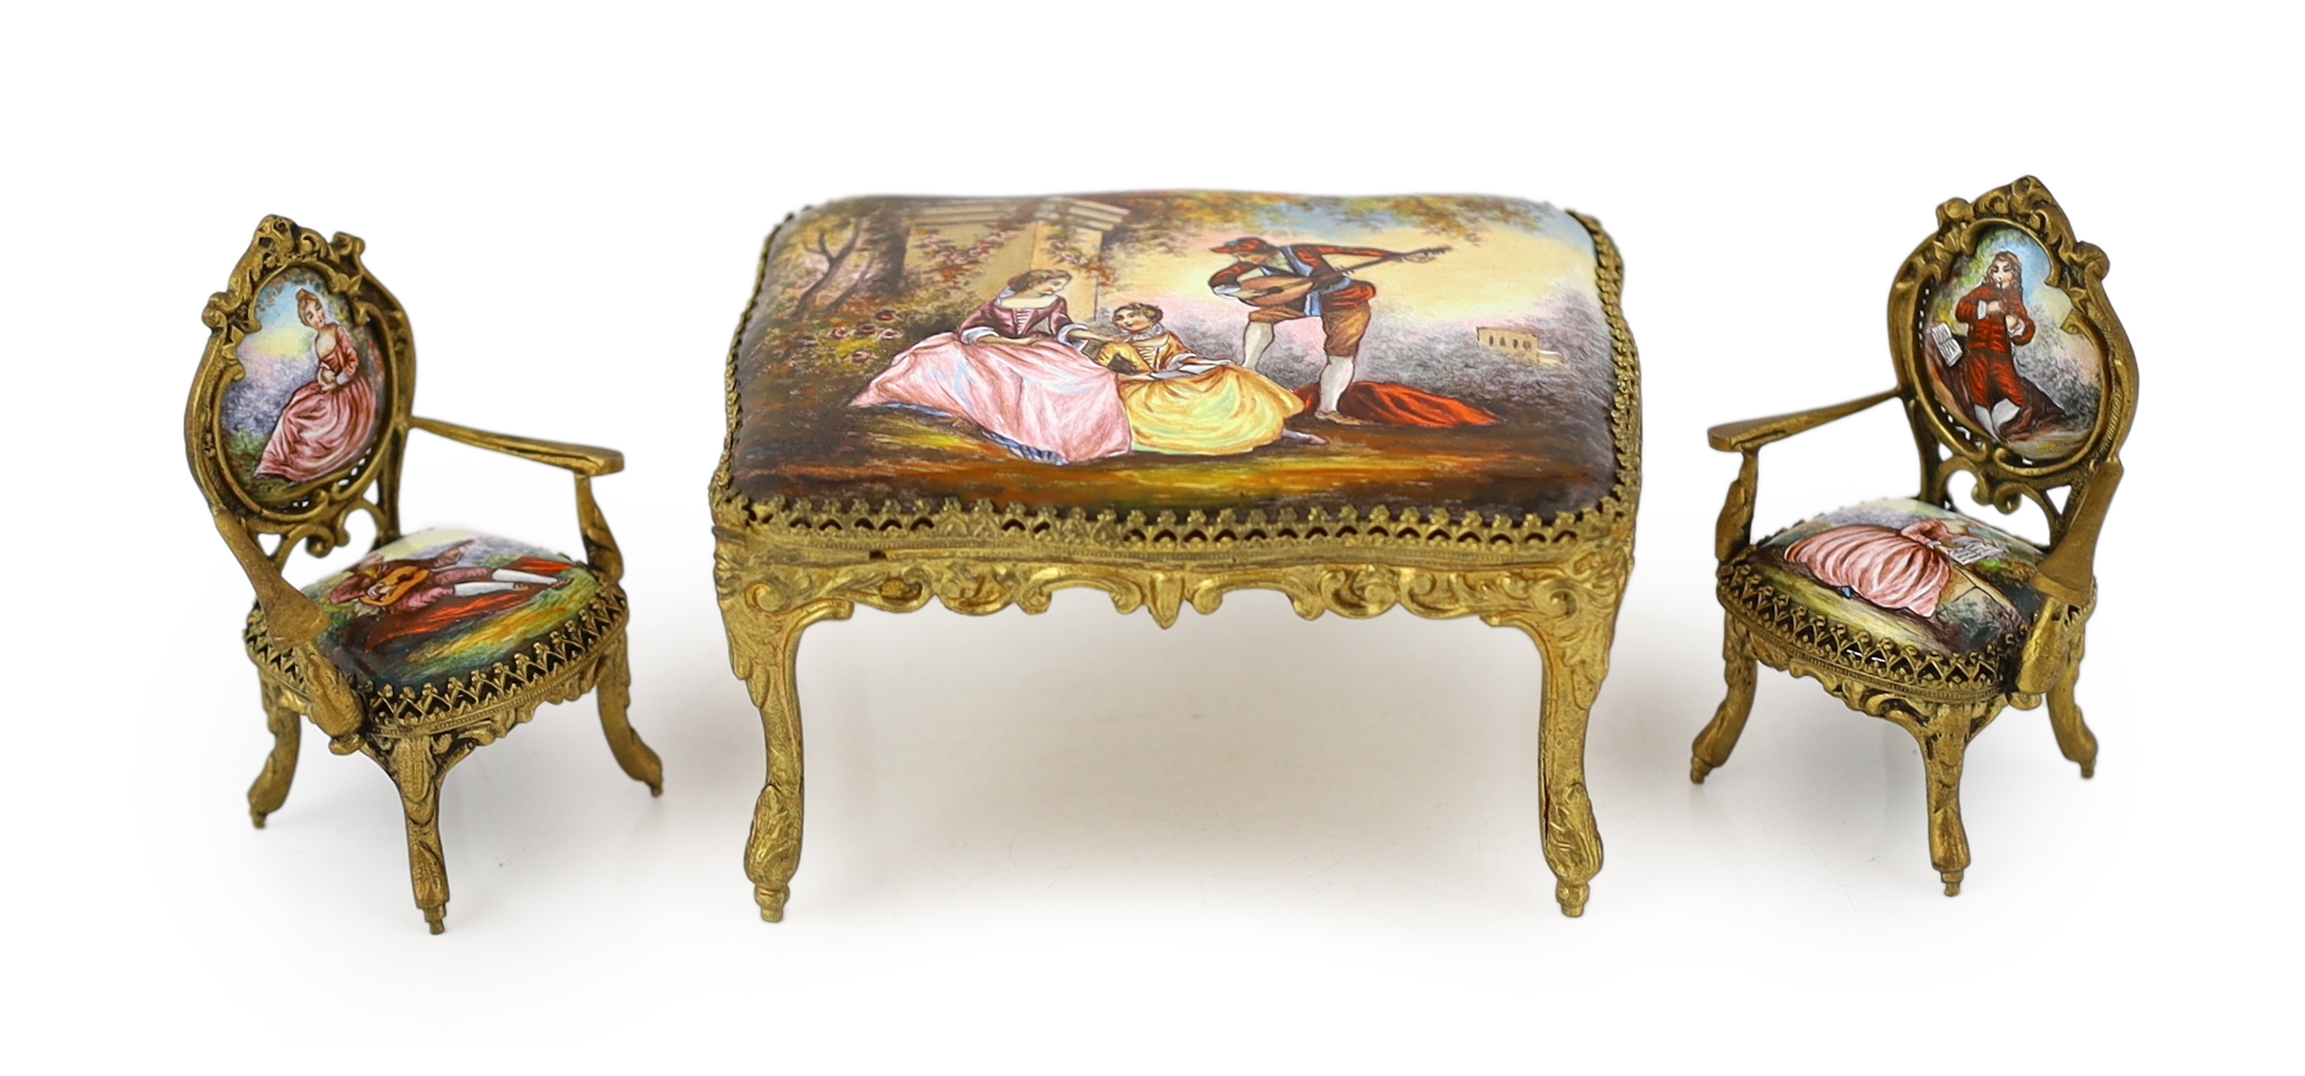 A 20th century Swiss enamel and ormolu musical miniature doll's house table with a pair of matching salon chairs, table 9.5 x 7.5cm, 5cm high, chairs 7cm high